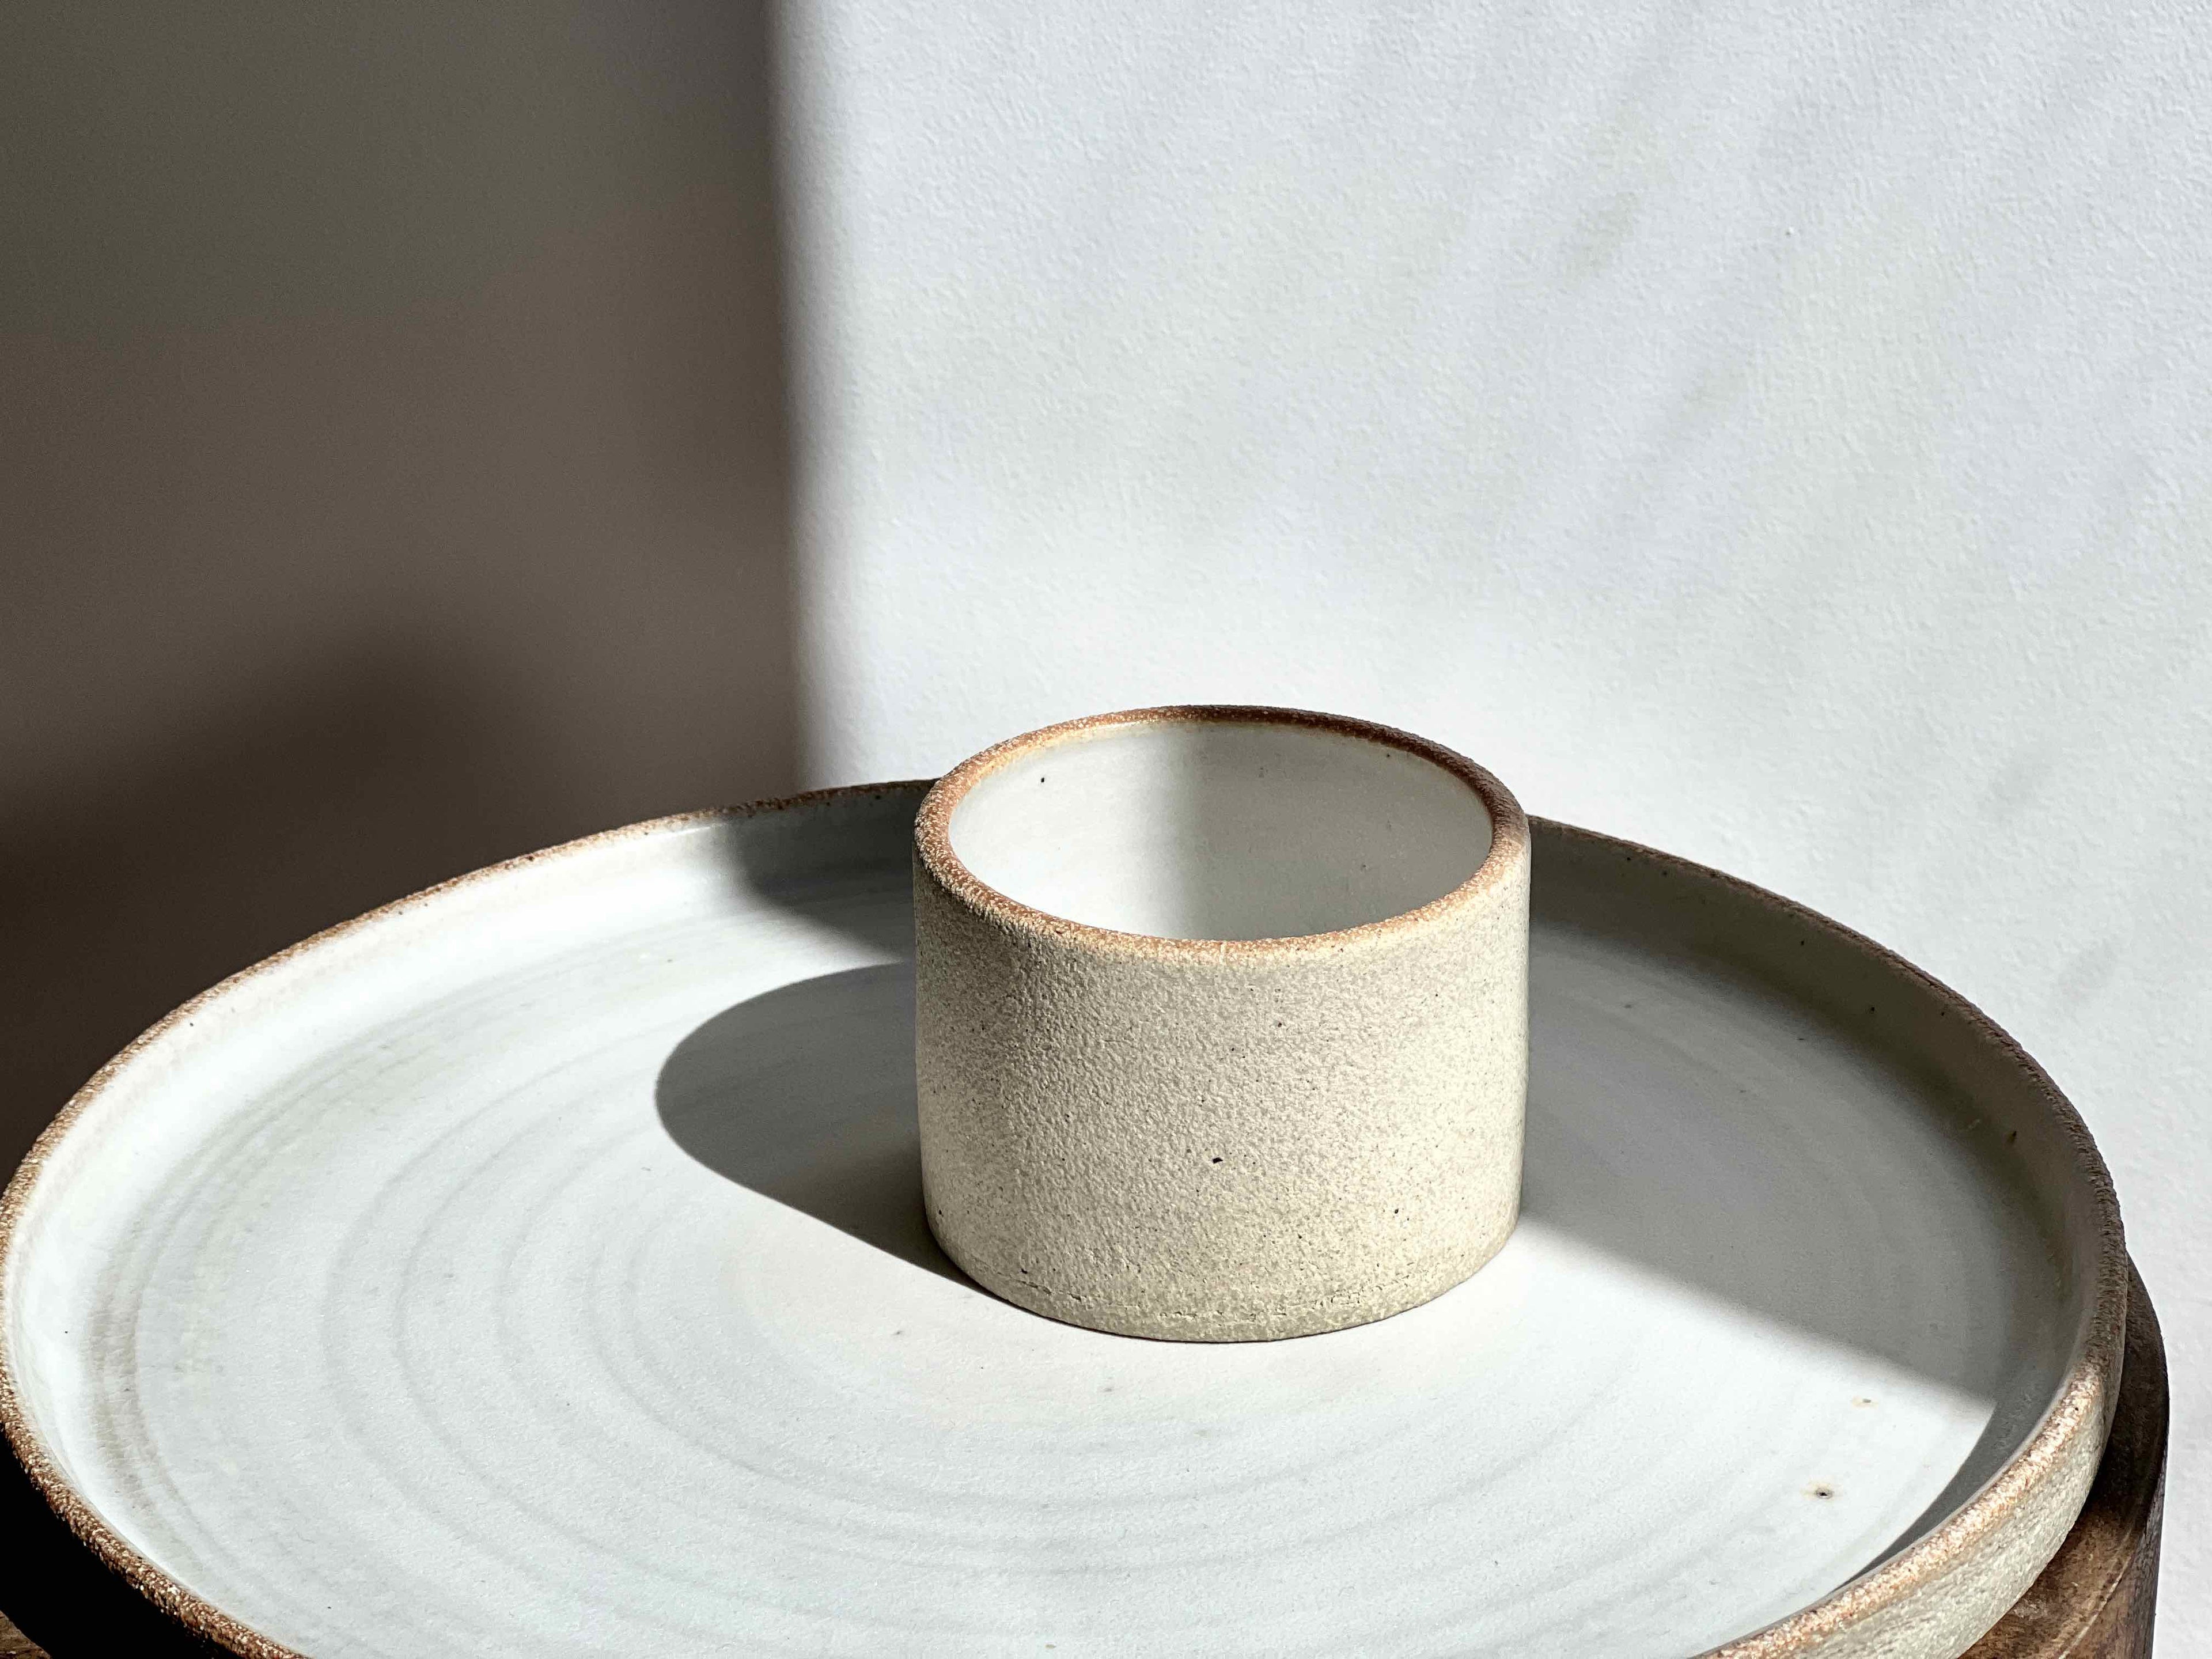 Ceramic tray and candle holder